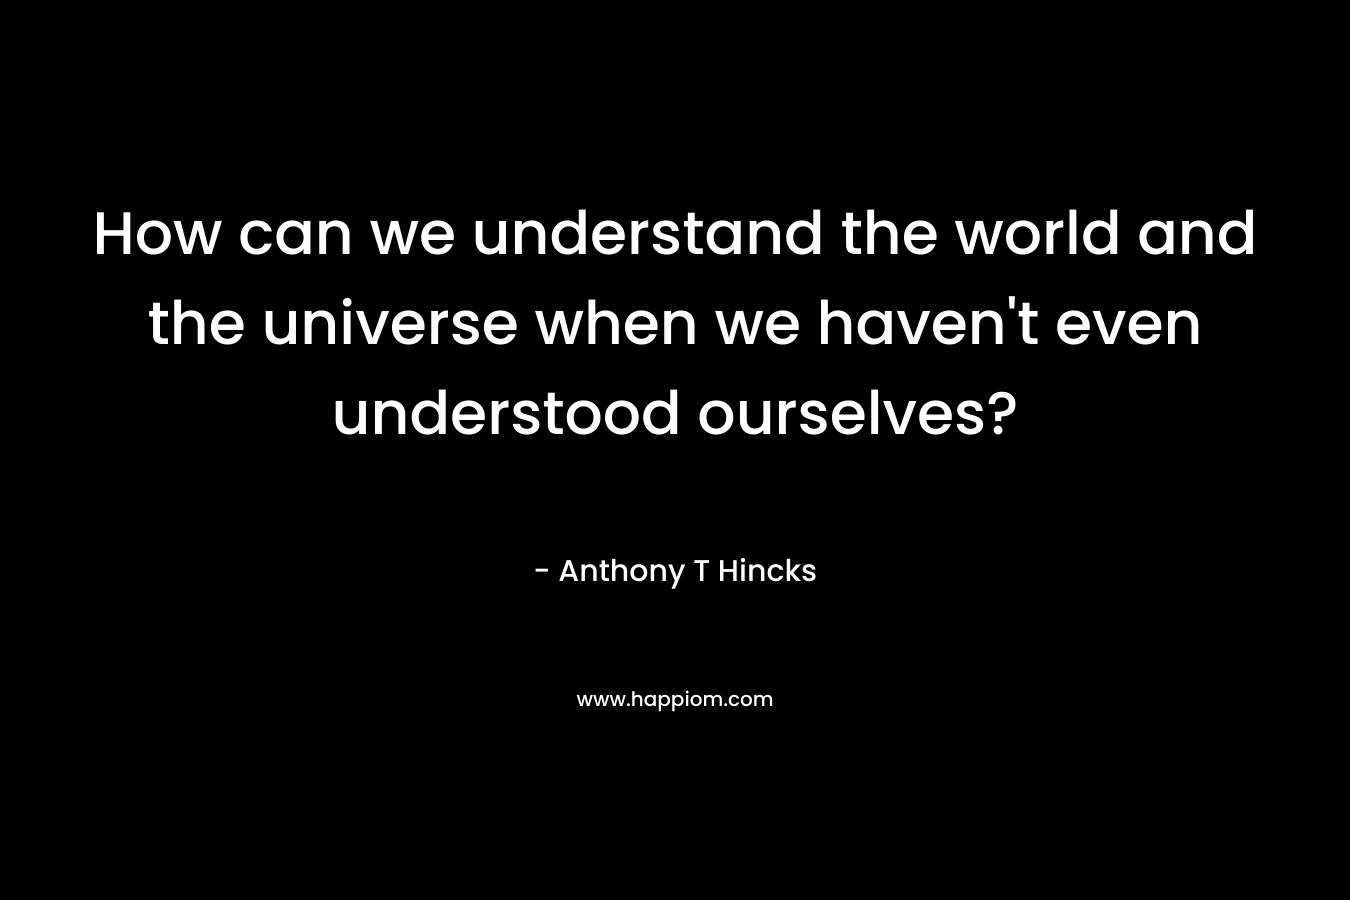 How can we understand the world and the universe when we haven't even understood ourselves?